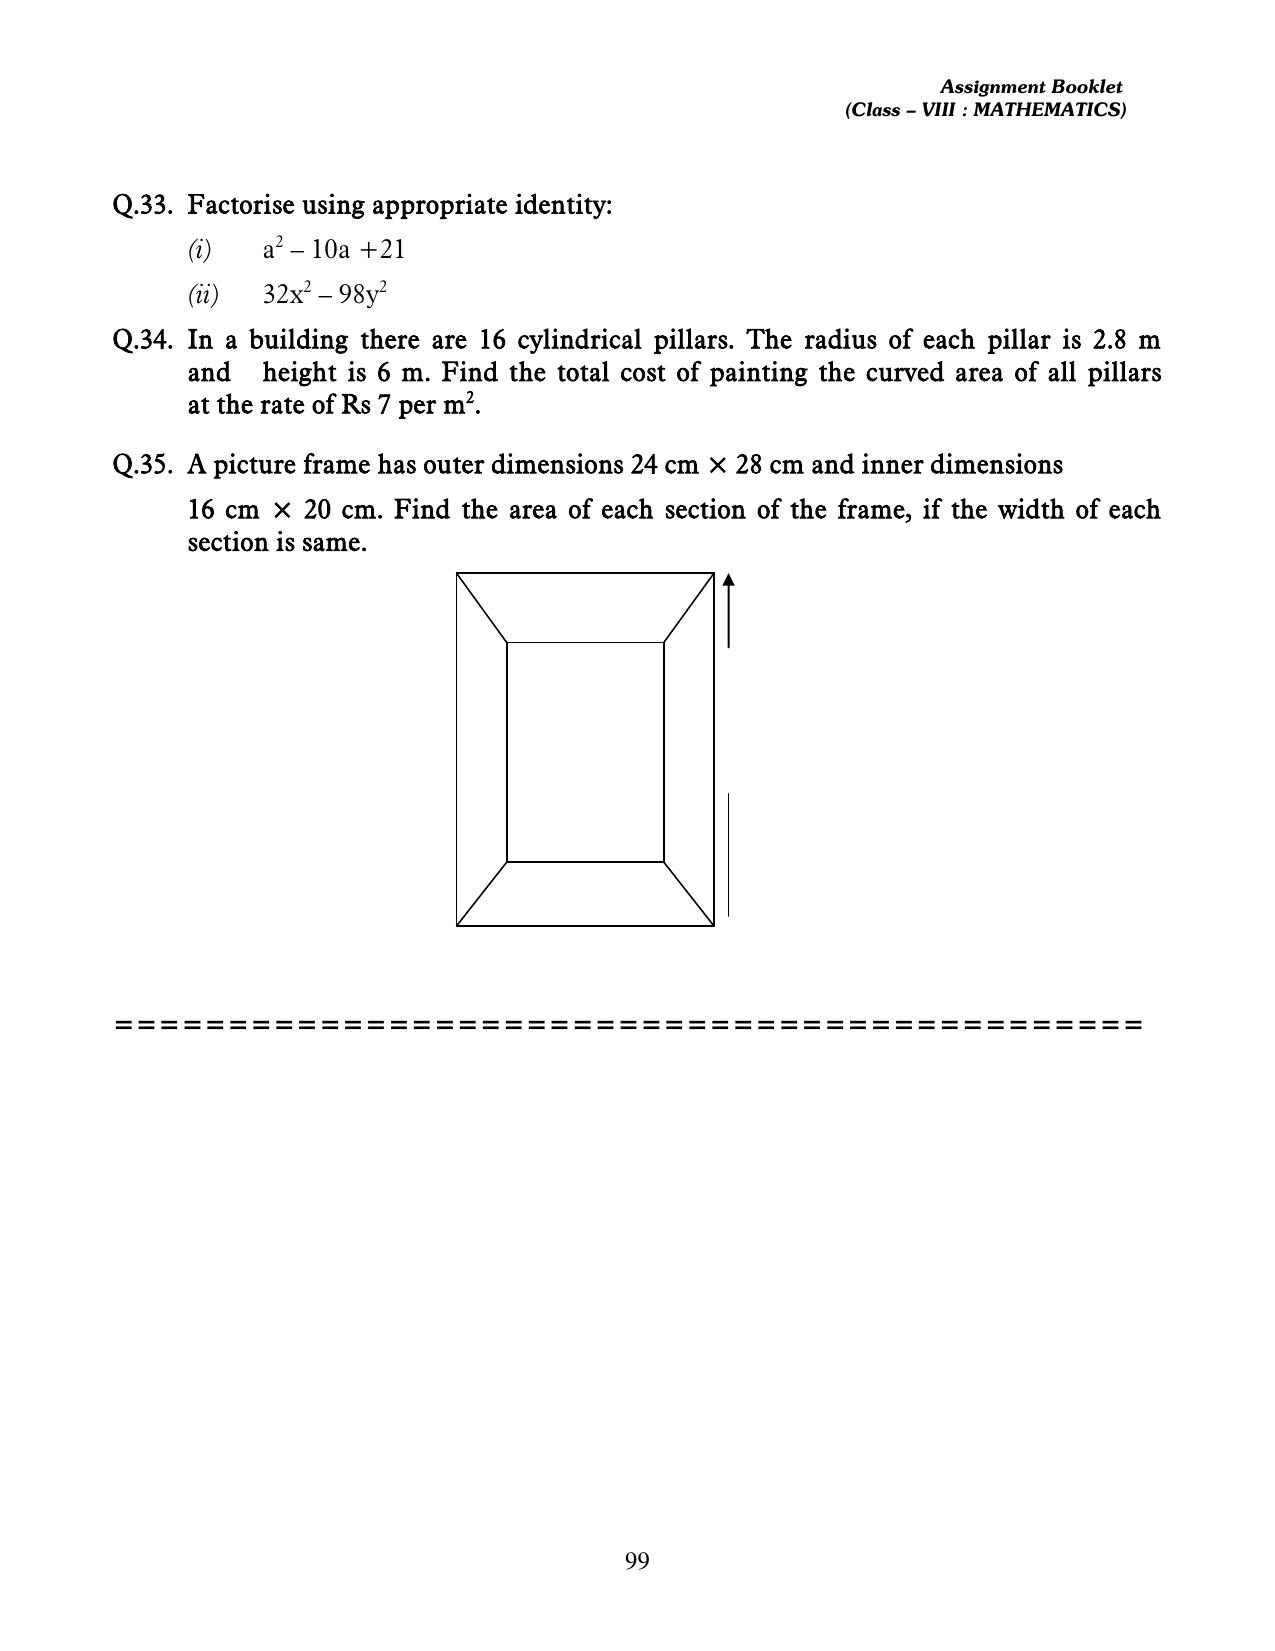 CBSE Worksheets for Class 8 Mathematics Assignment 13 - Page 89